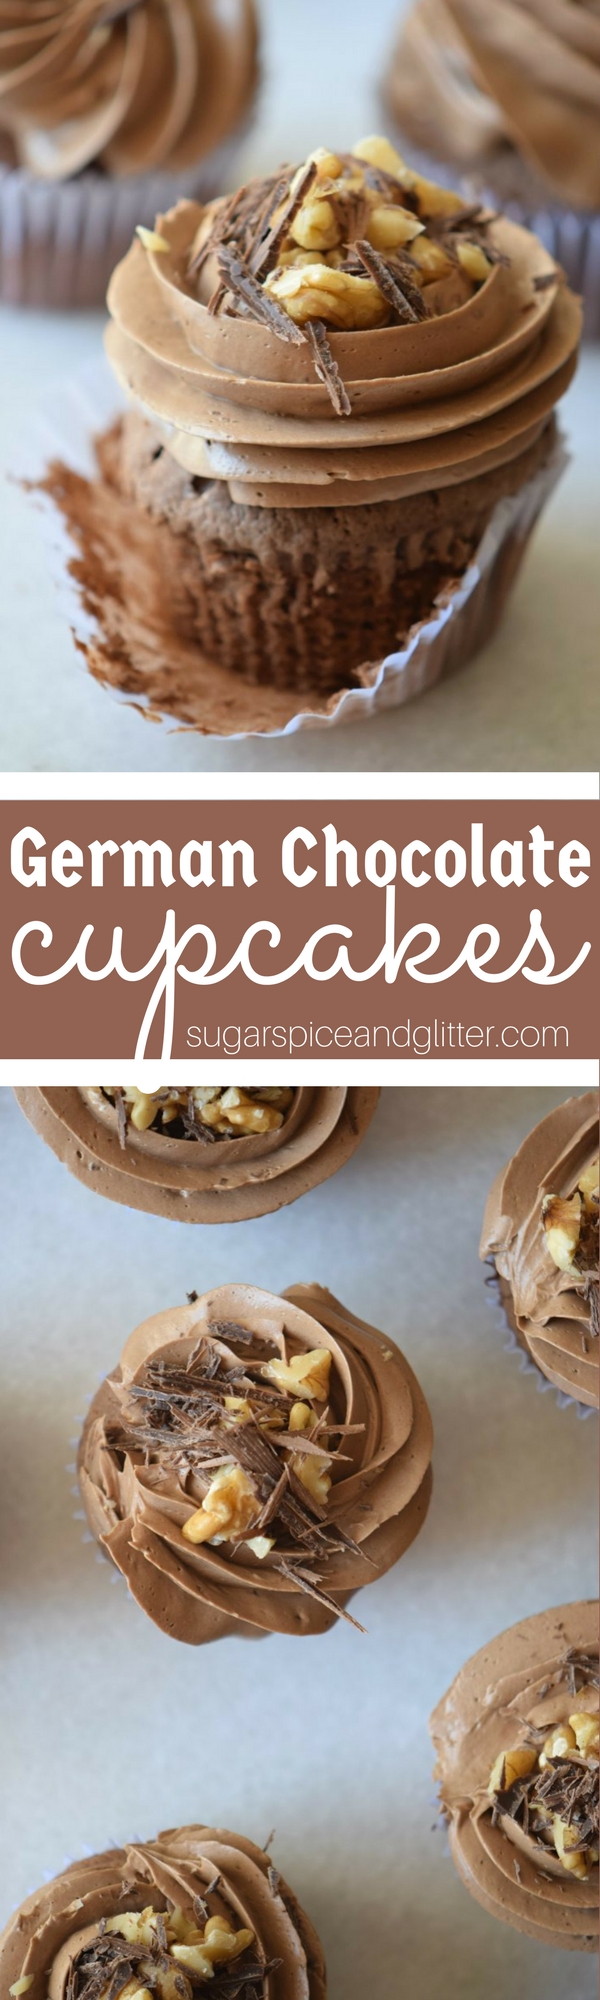 Authentic German Chocolate Cupcakes with tart chocolate frosting and a sticky coconut-pecan topping. These from-scratch chocolate cupcakes are perfect for the semi-sweet chocolate fan